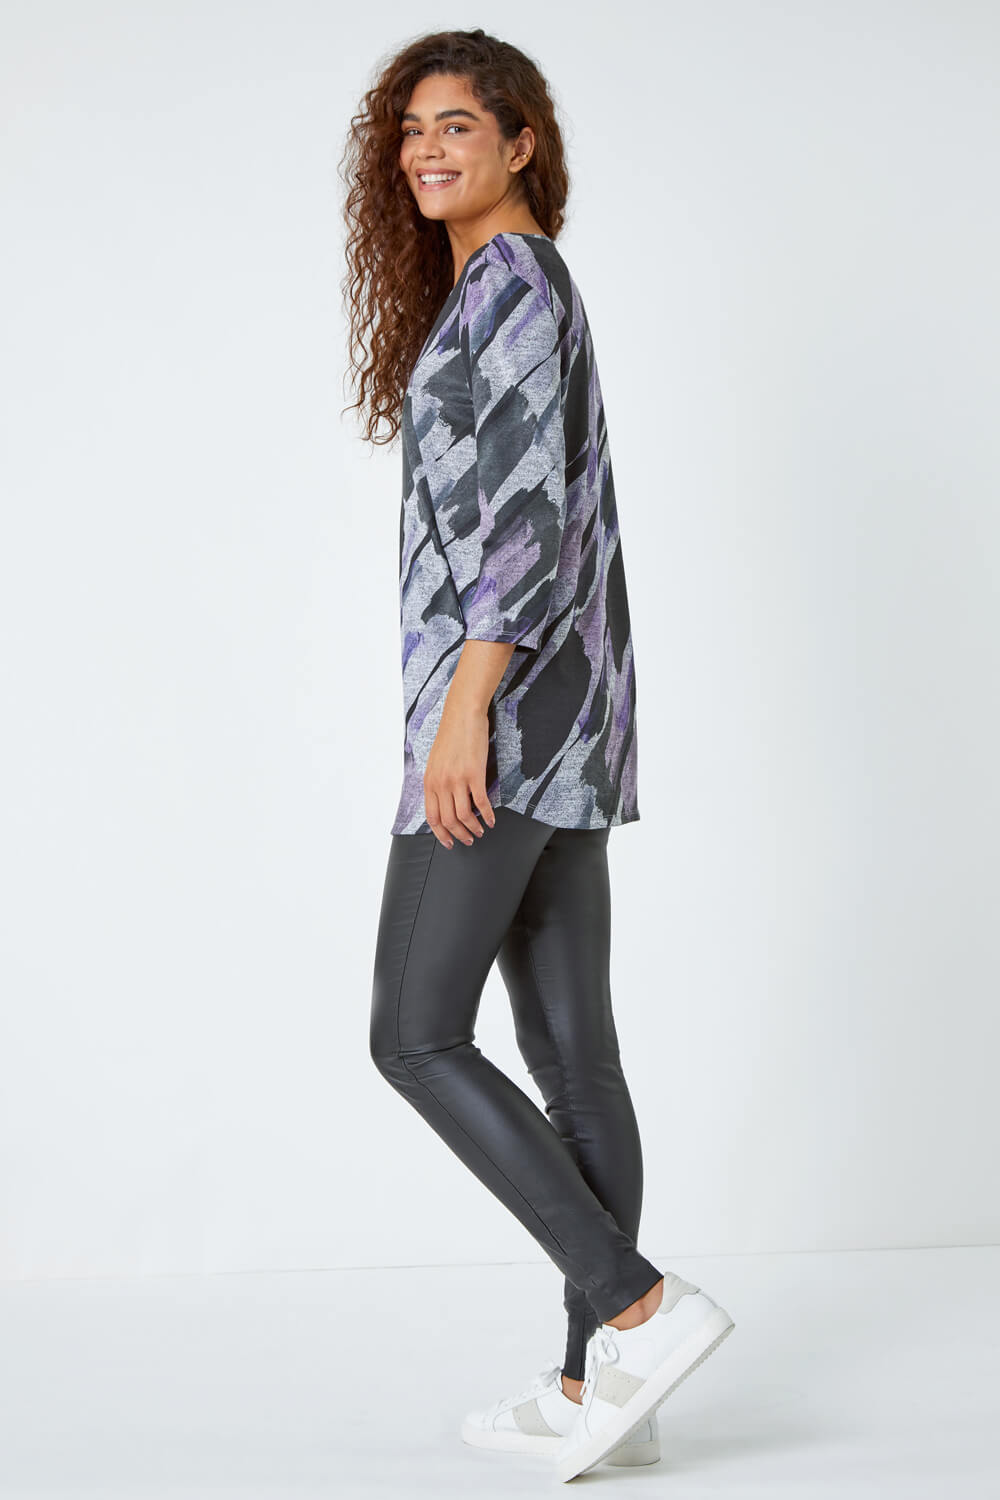 Purple Abstract Print Pocket Detail Tunic Stretch Top, Image 3 of 5